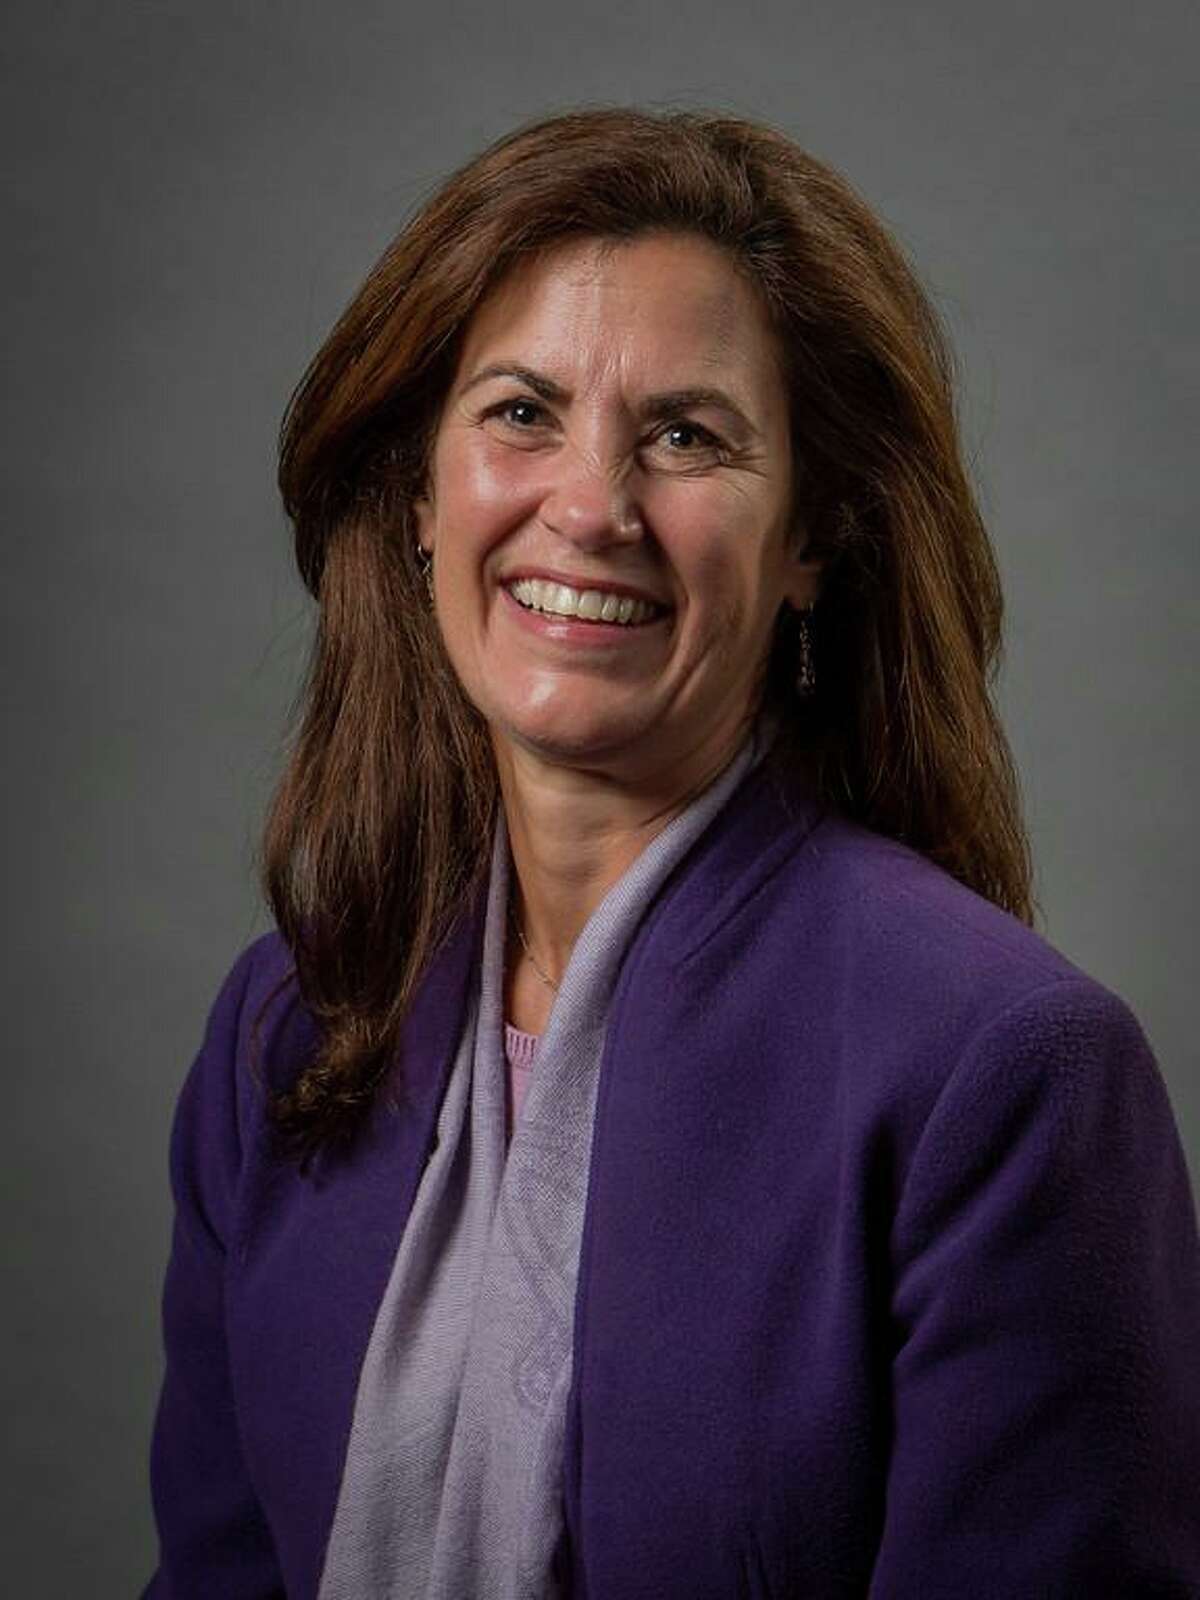 Stephanie Arlis-Mayor is the chairperson of the CIAC’s Connecticut State Medical Society (CSMS) committee and the head team physician for Yale University athletics.